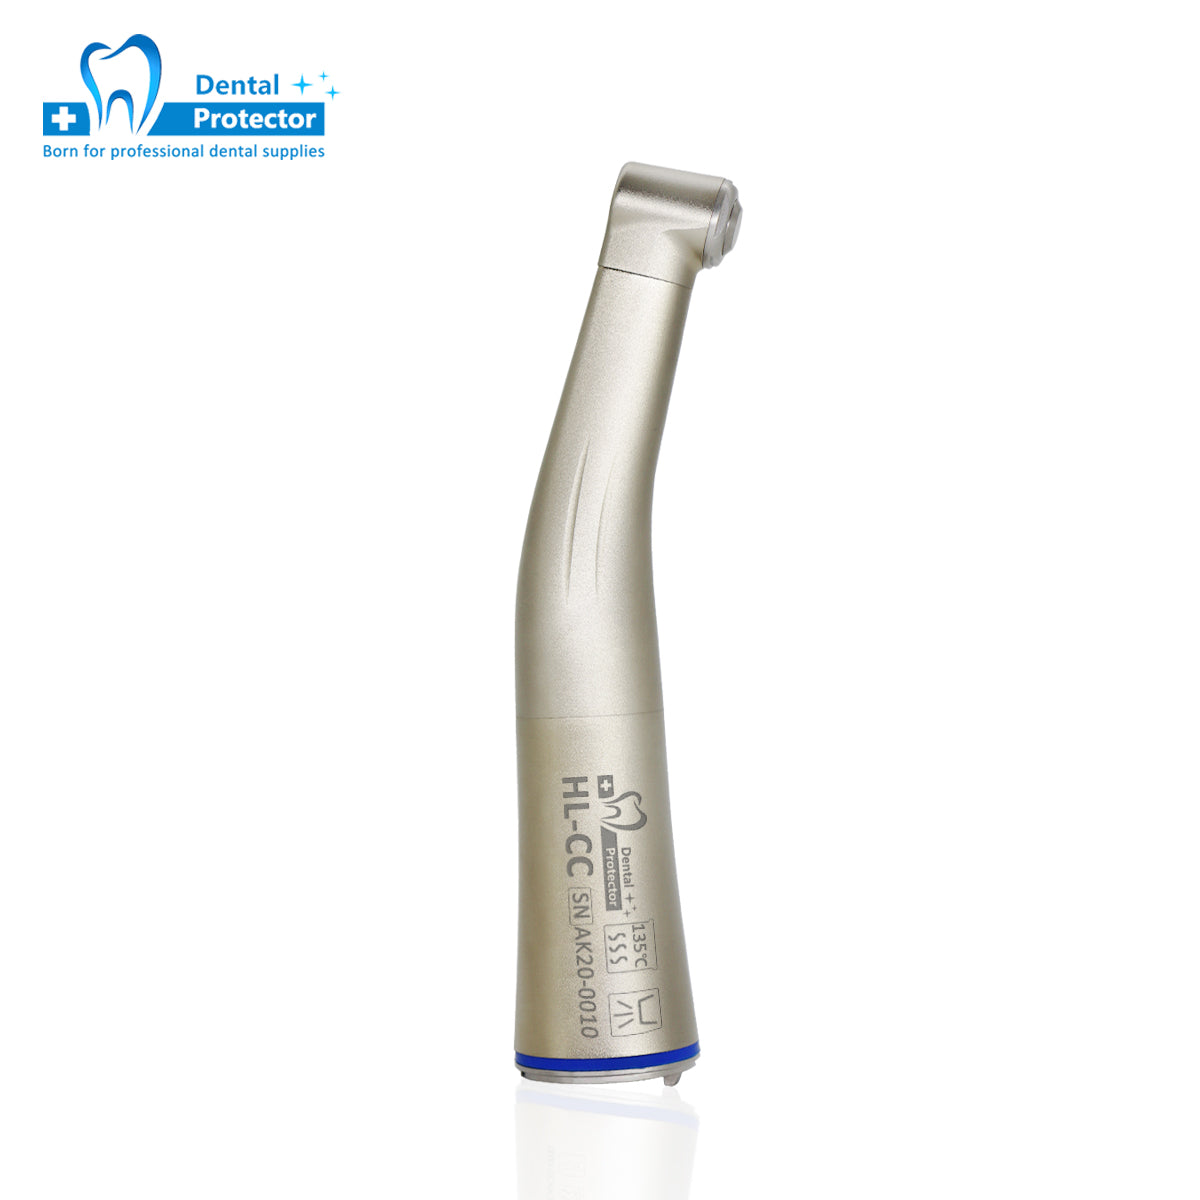 HL-CC Low Speed Contra Angel Dental Handpiece With Optical Fiber